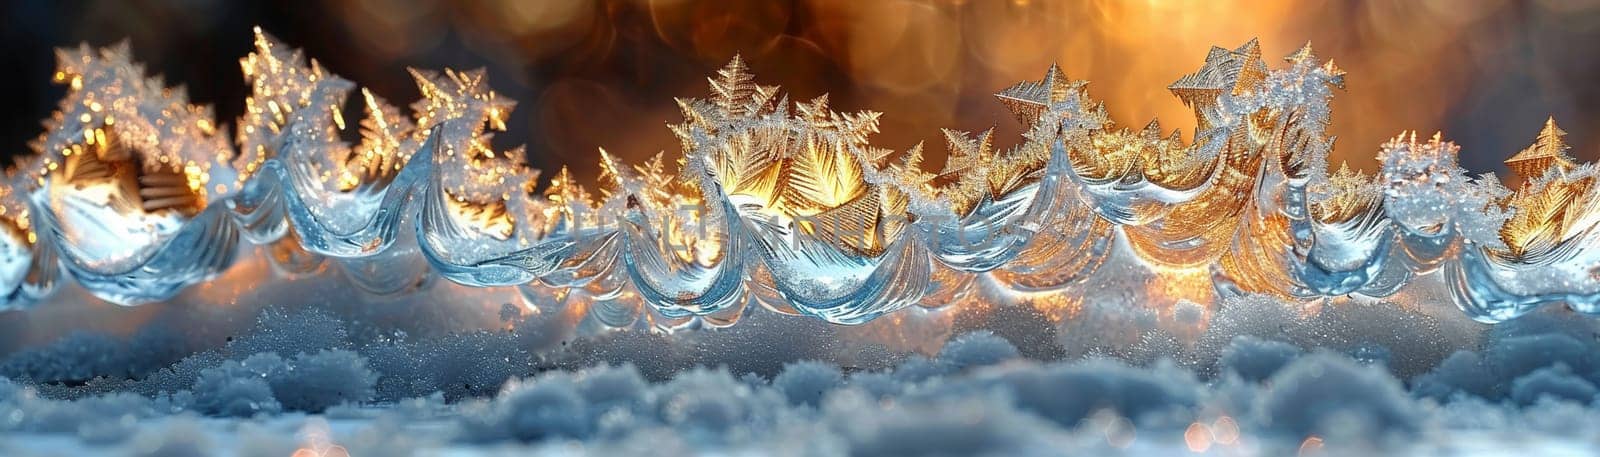 Close-up of intricate ice patterns on a window, illustrating winter's artistry.